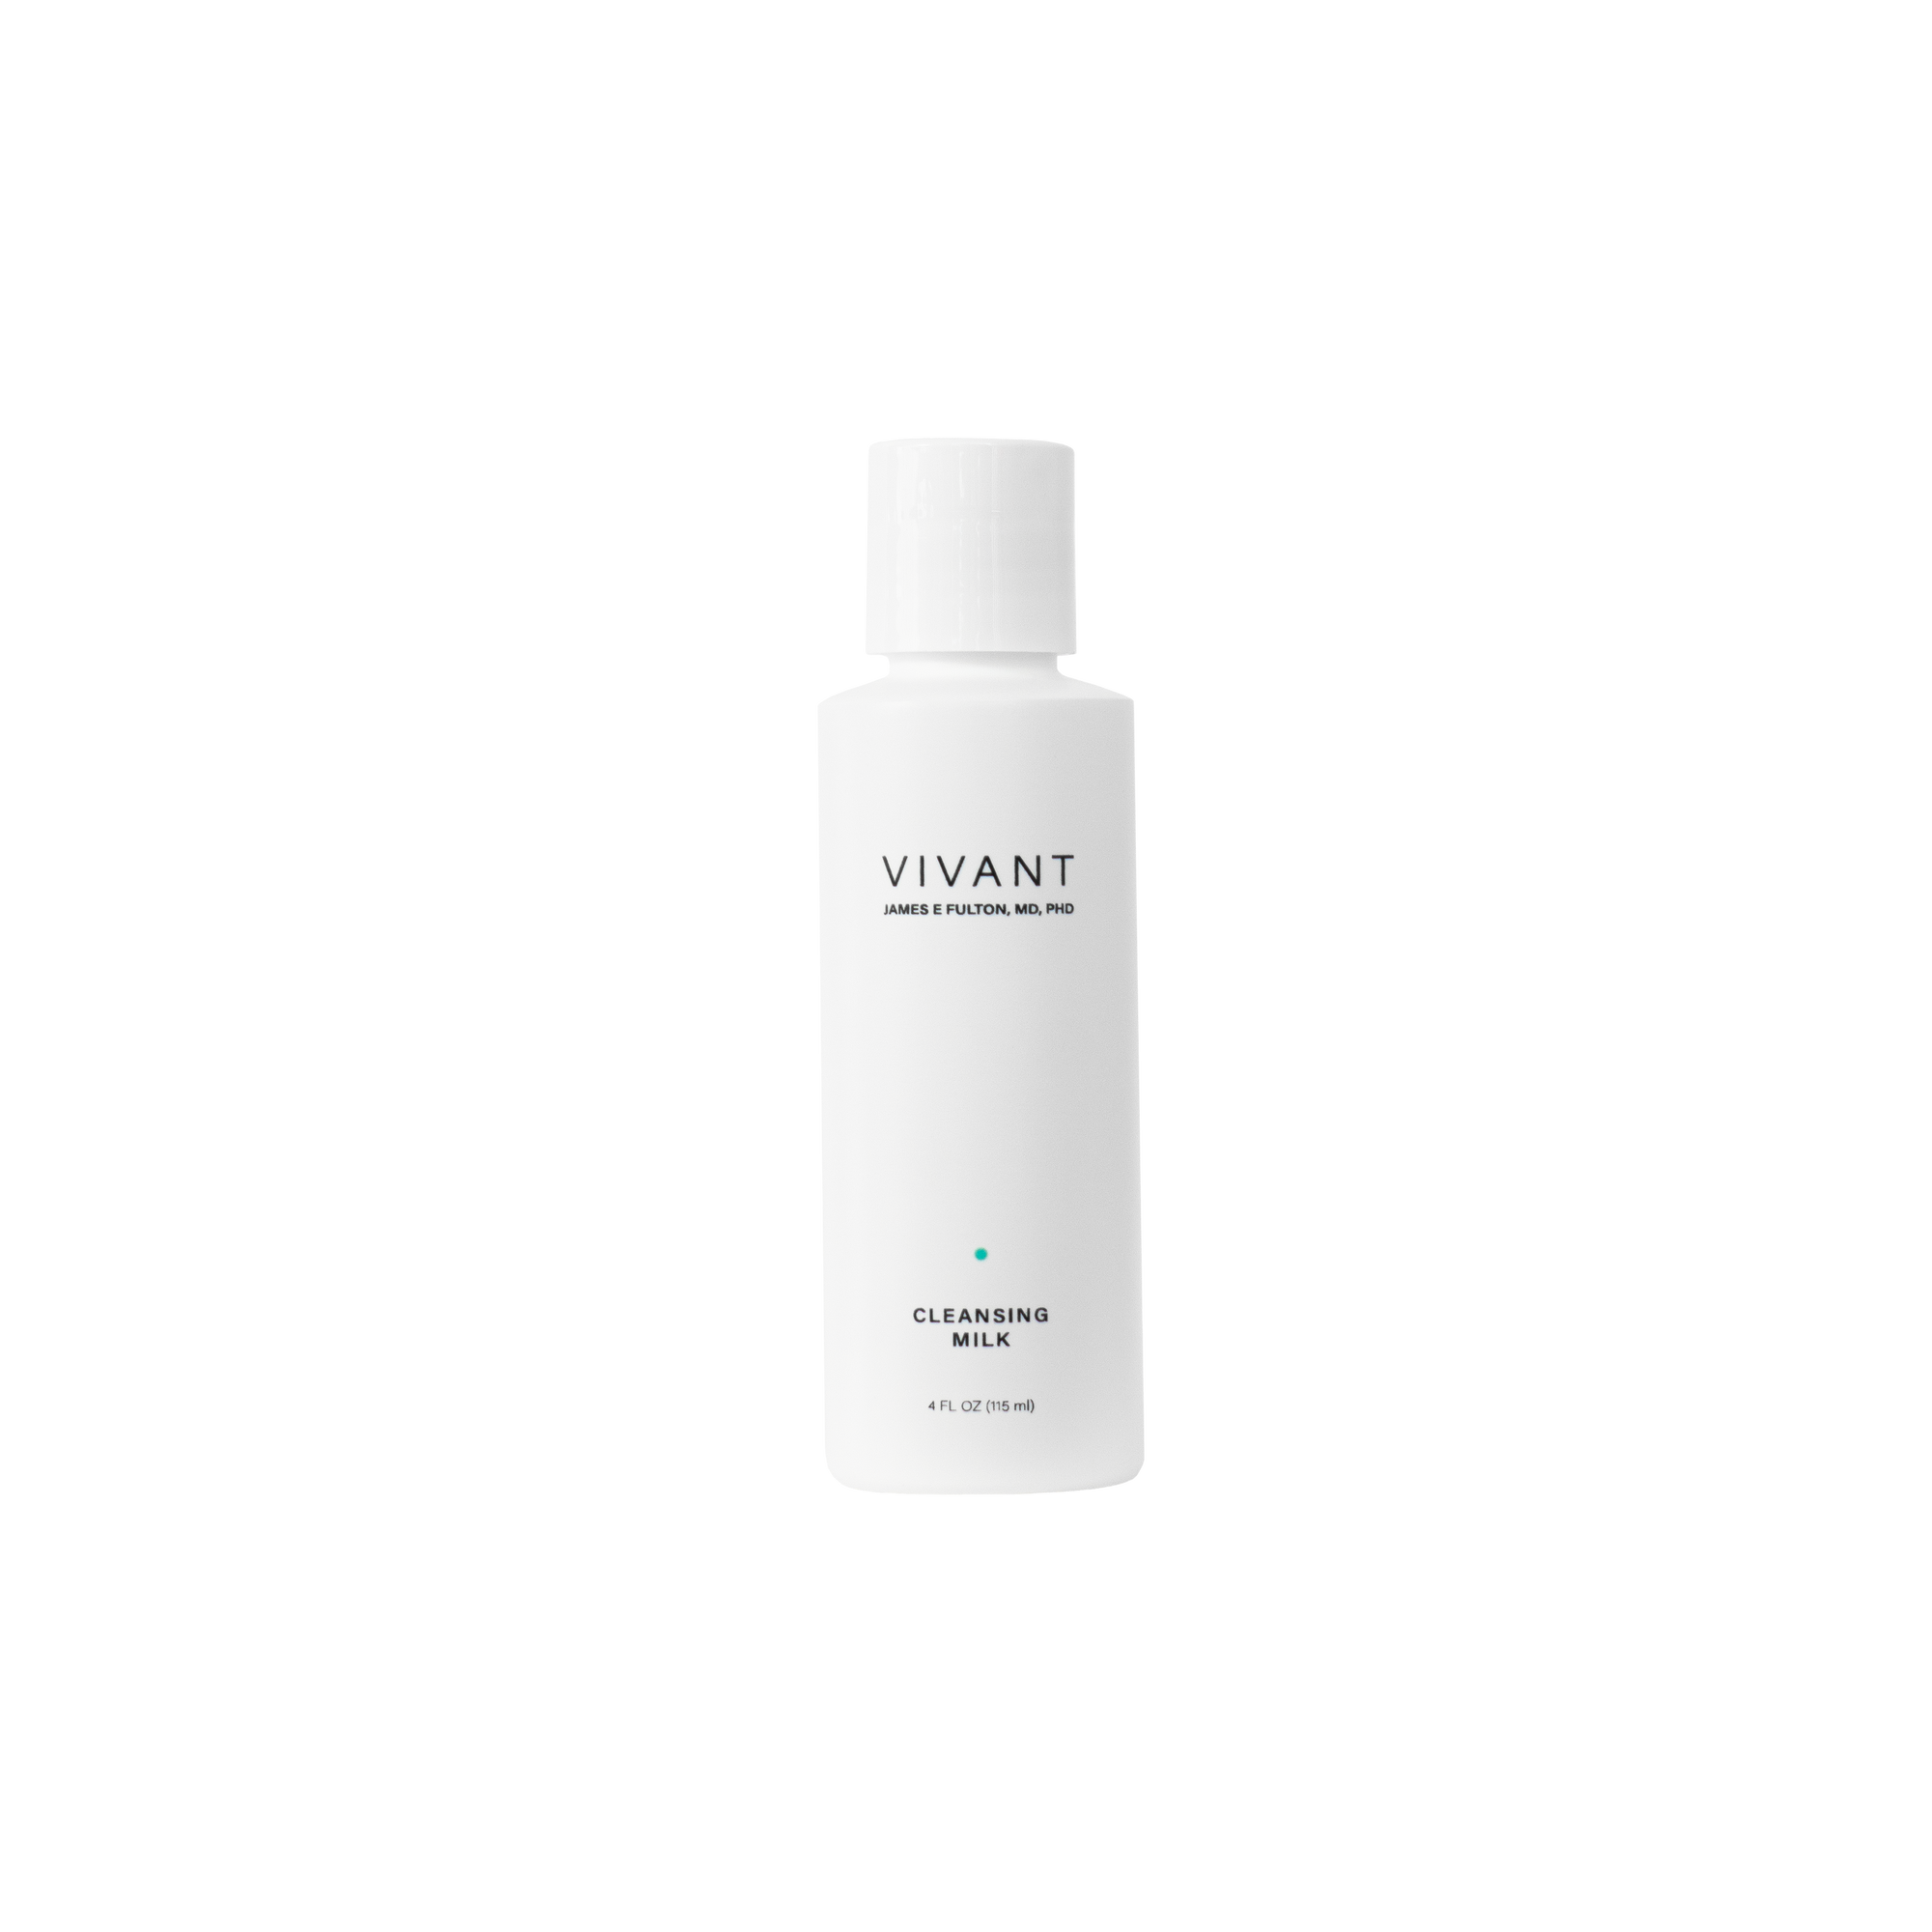 CLEANSING MILK GENTLE NON-DRYING CLEANSER